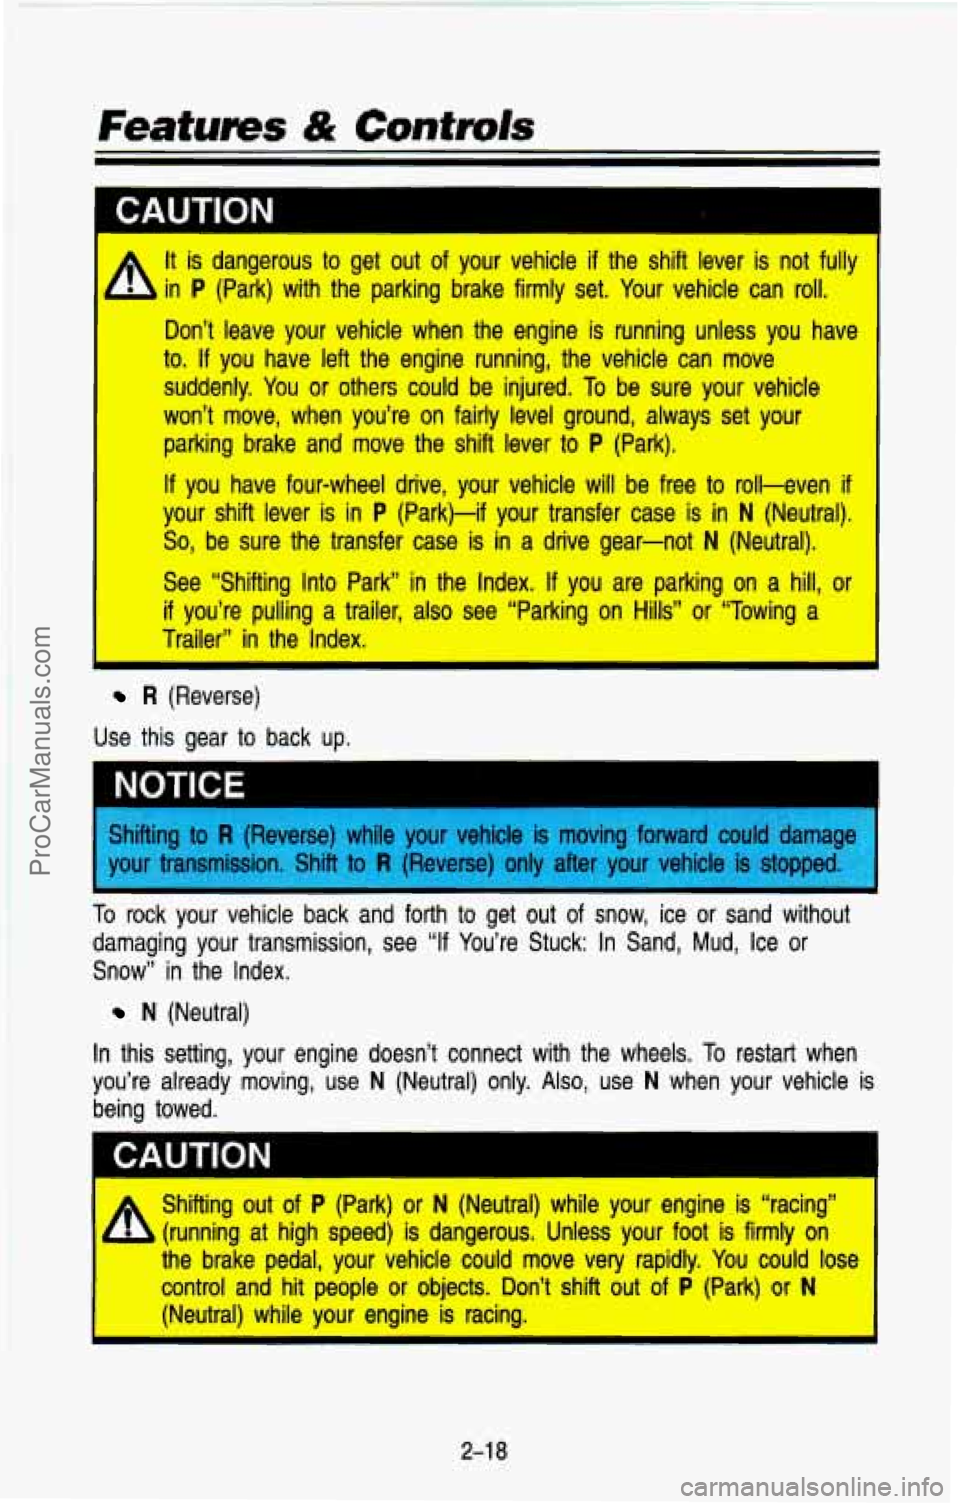 CHEVROLET SUBURBAN 1993  Owners Manual - It is dangerous to get  out of your  vehicle if the  shift  lever is not  fully 
4 in P (Park)  with  the  parking  brake  firmly  set.  Your vehicle  can roll. 
Don’t  leave  your  vehicle  when 